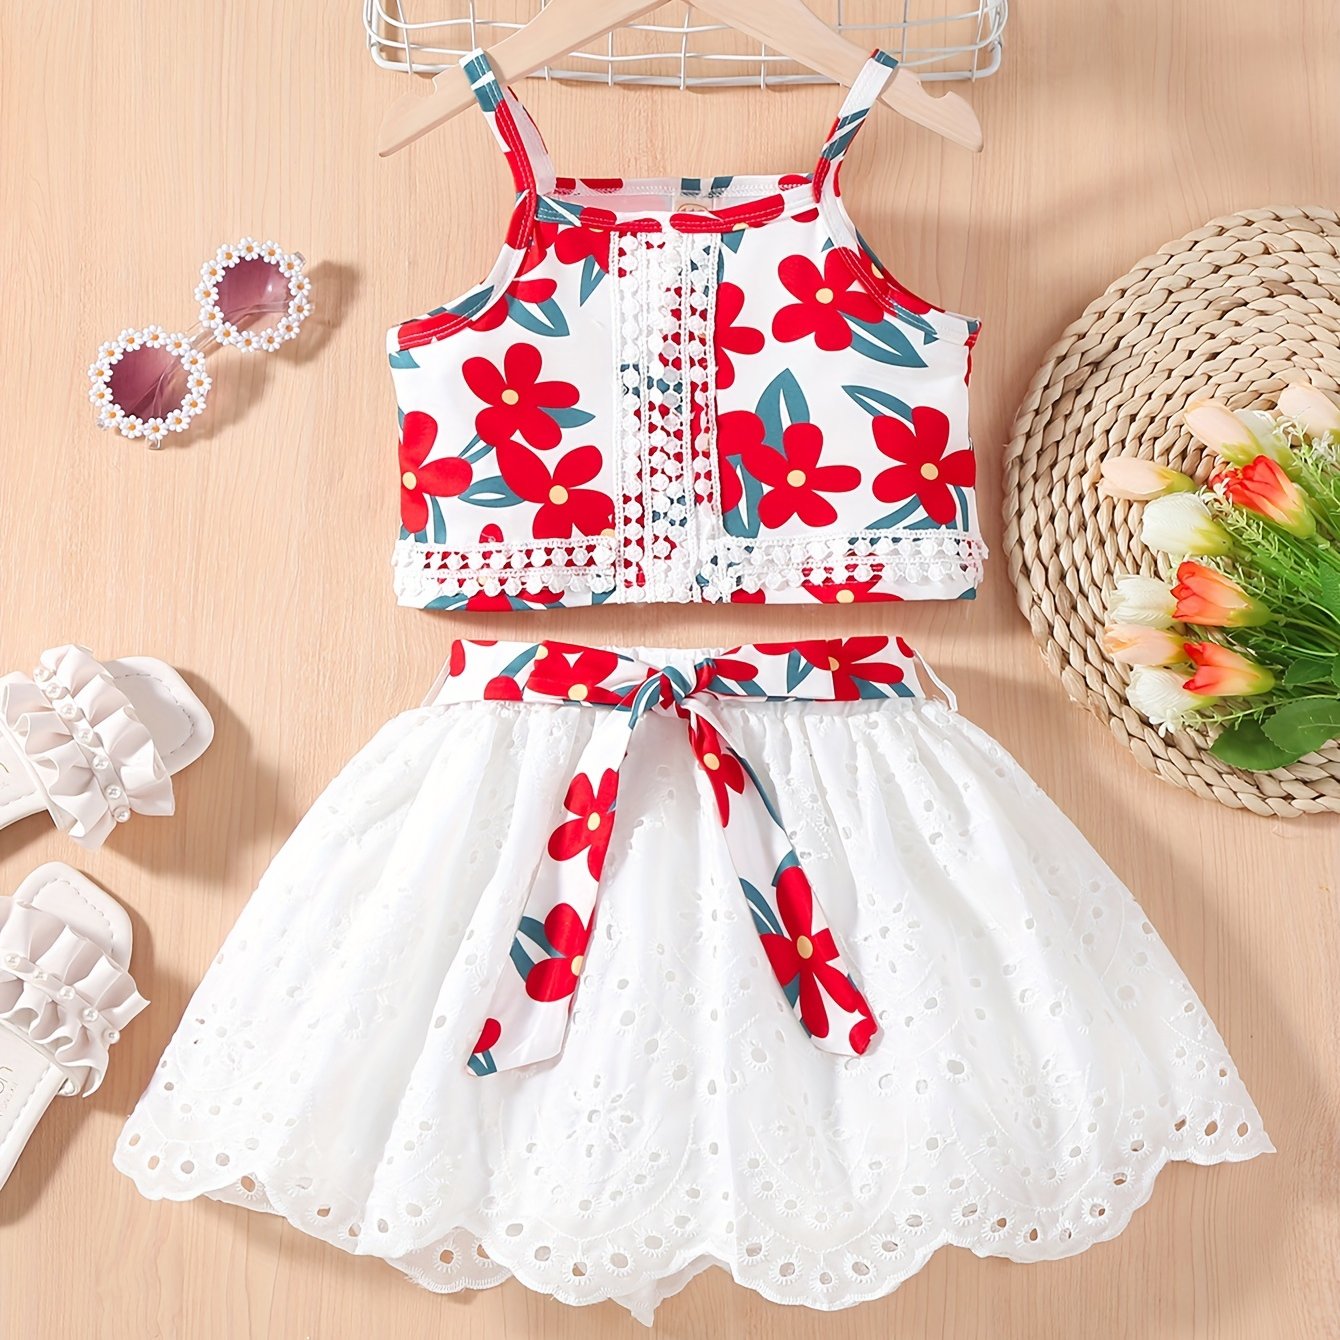 2pcs Baby Girl Lace Design Allover Floral Print Sleeveless Spaghetti Strap Top and Jeans Set